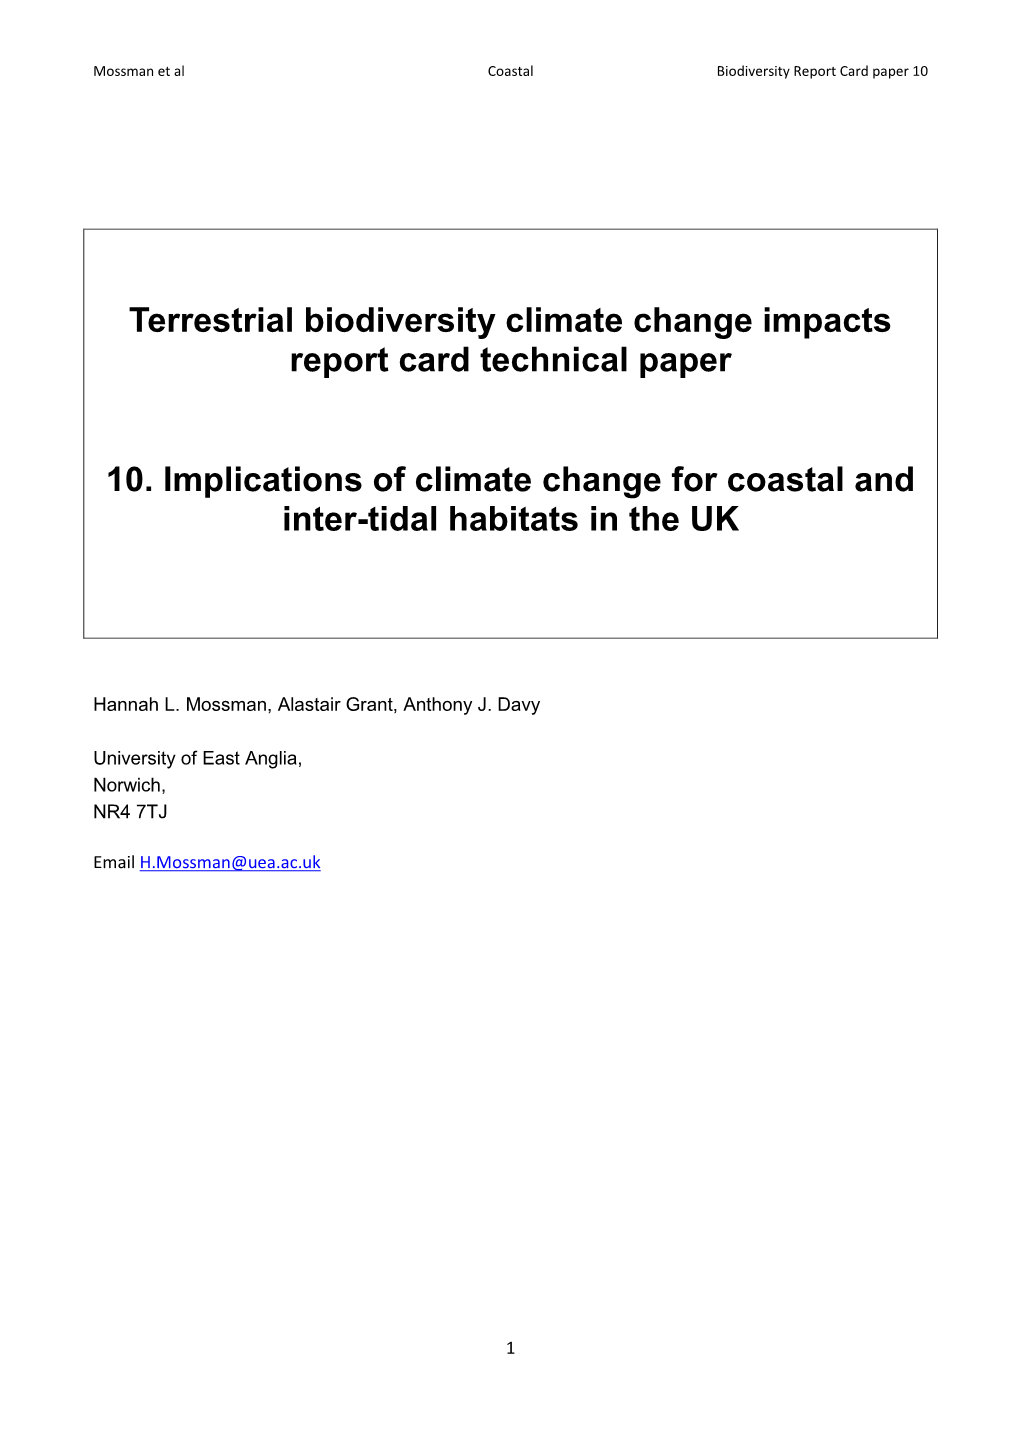 Terrestrial Biodiversity Climate Change Impacts Report Card Technical Paper